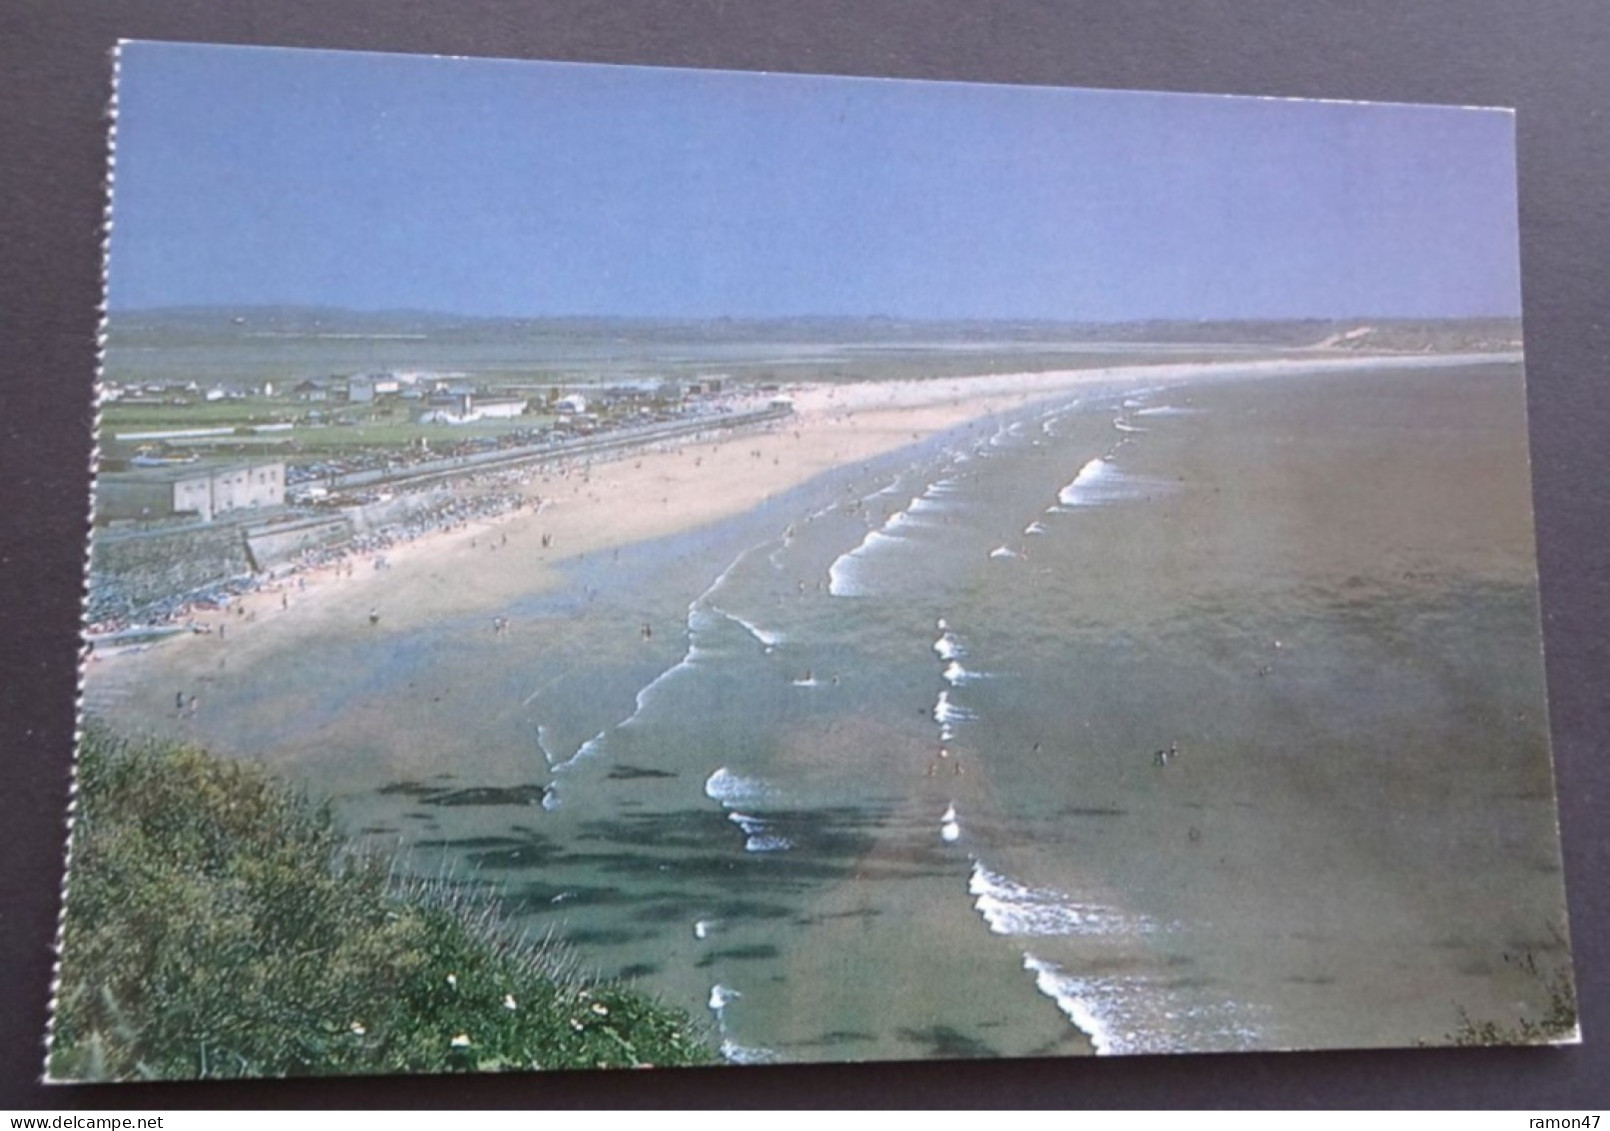 Tramore, The Most Popular Resort In South East Ireland - The Intacta Print Collection Of Waterford - Waterford